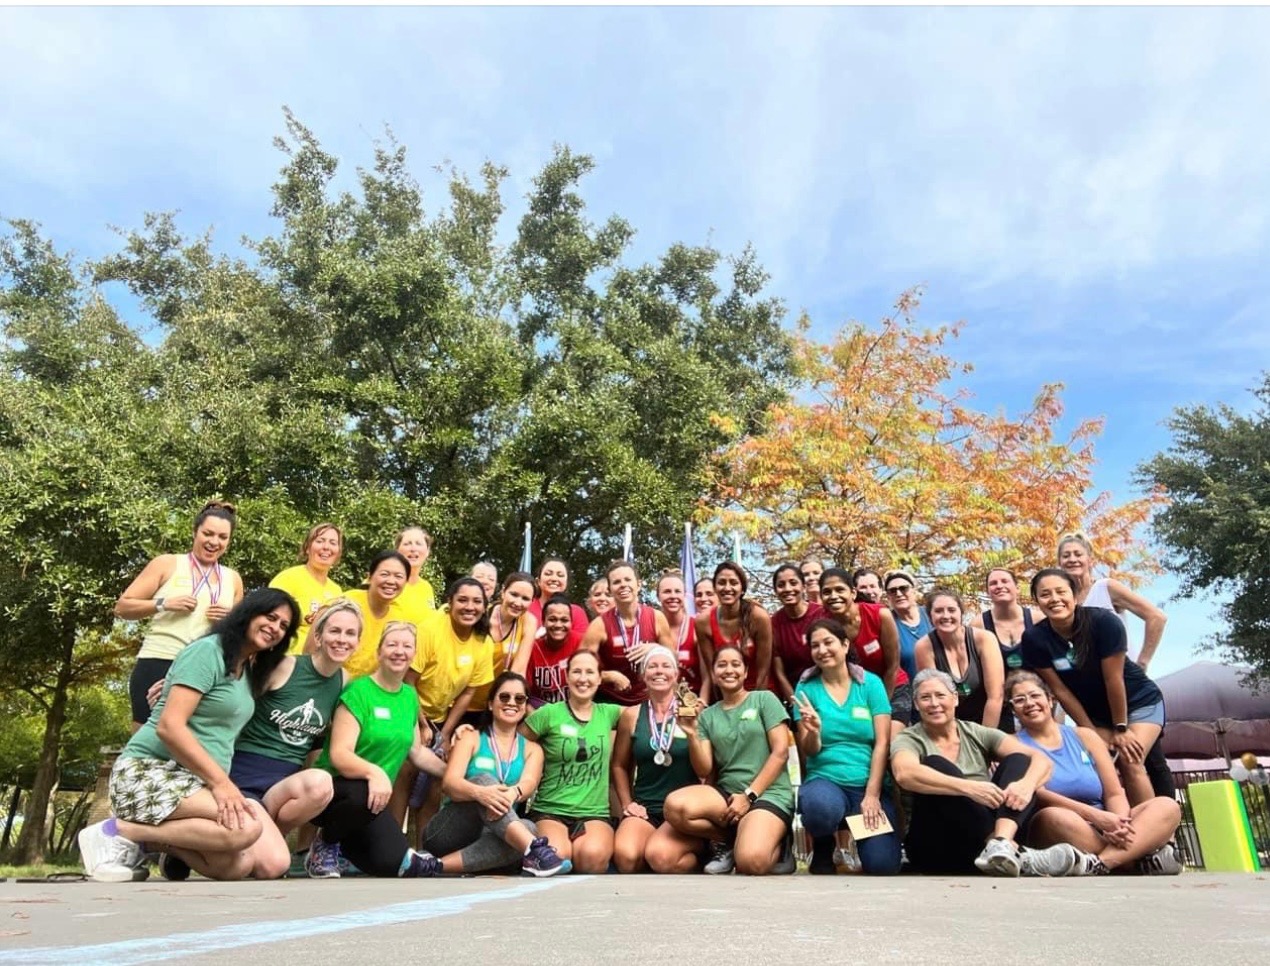 Females In Action Workout Group in Katy Celebrates One-Year Anniversary